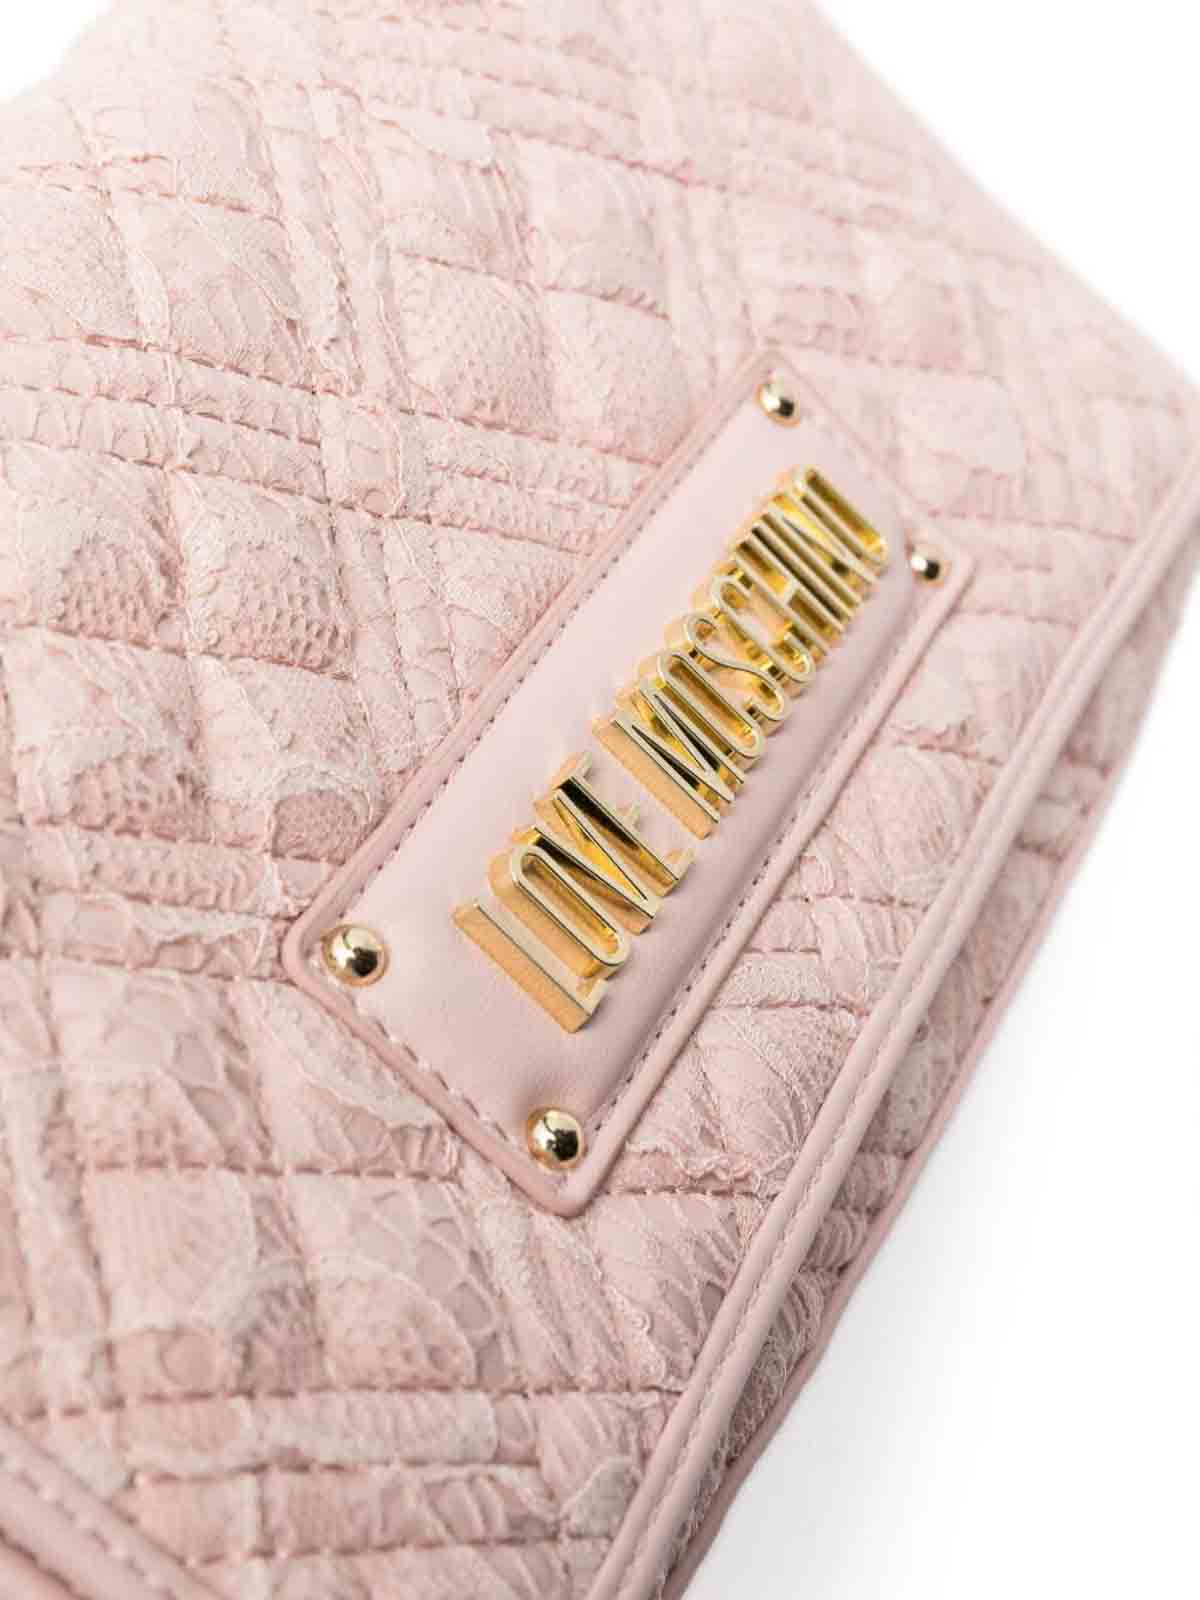 Shop Love Moschino Laced Crossbody In Pink